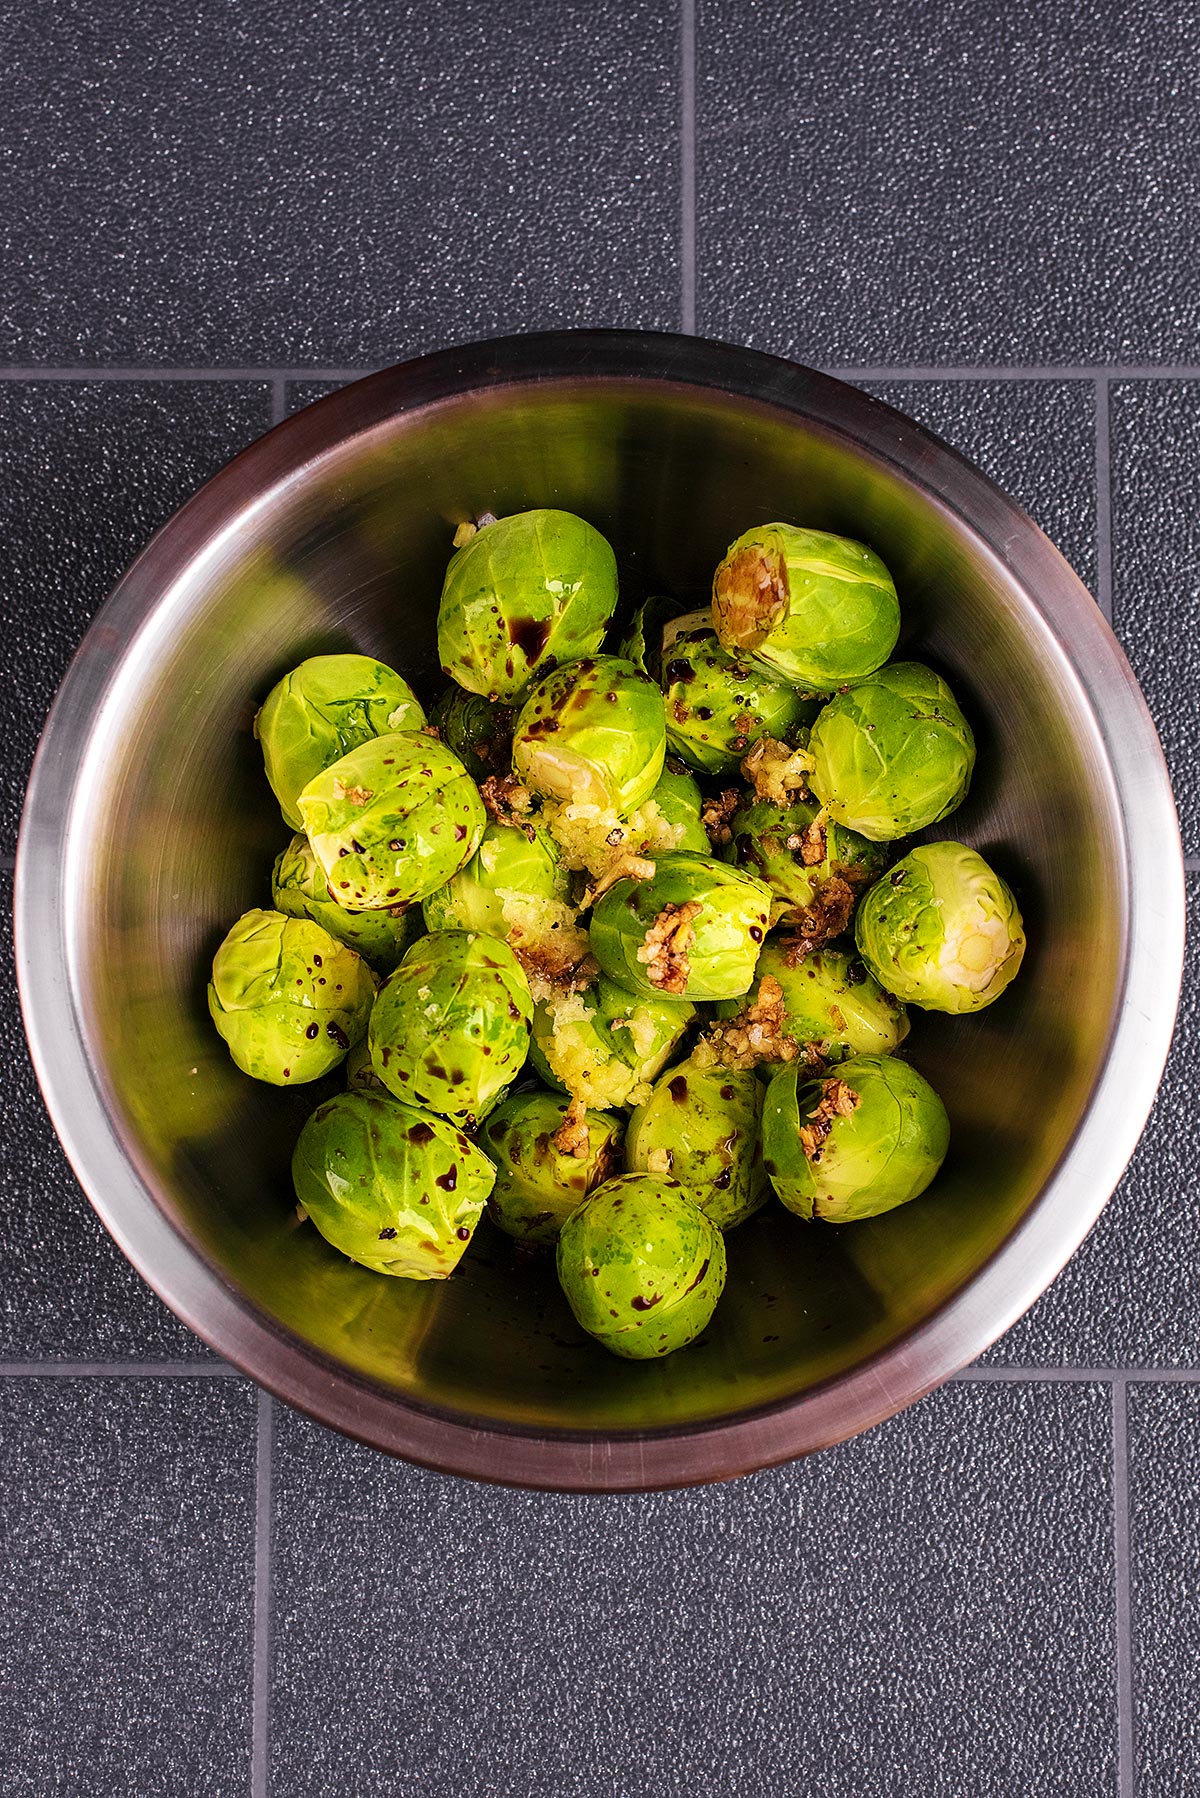 A stainless steel mixing bowl containing Brussels sprouts and balsamic vinegar.